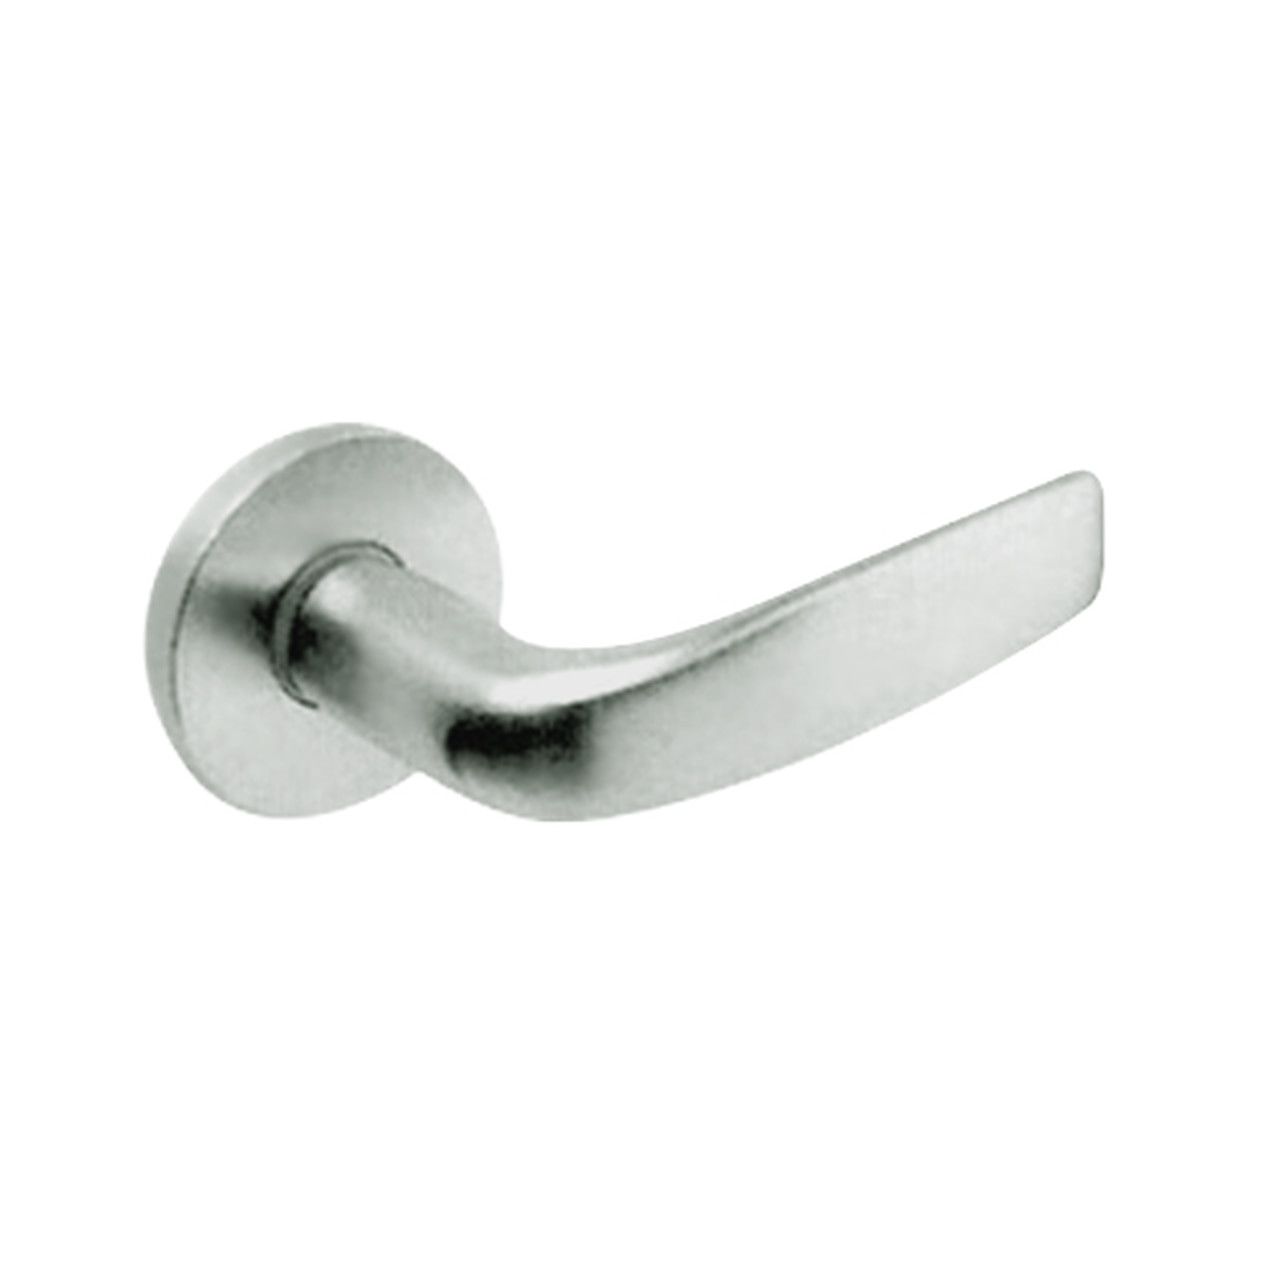 ML2042-CSA-619-M31 Corbin Russwin ML2000 Series Mortise Entrance Trim Pack with Citation Lever in Satin Nickel